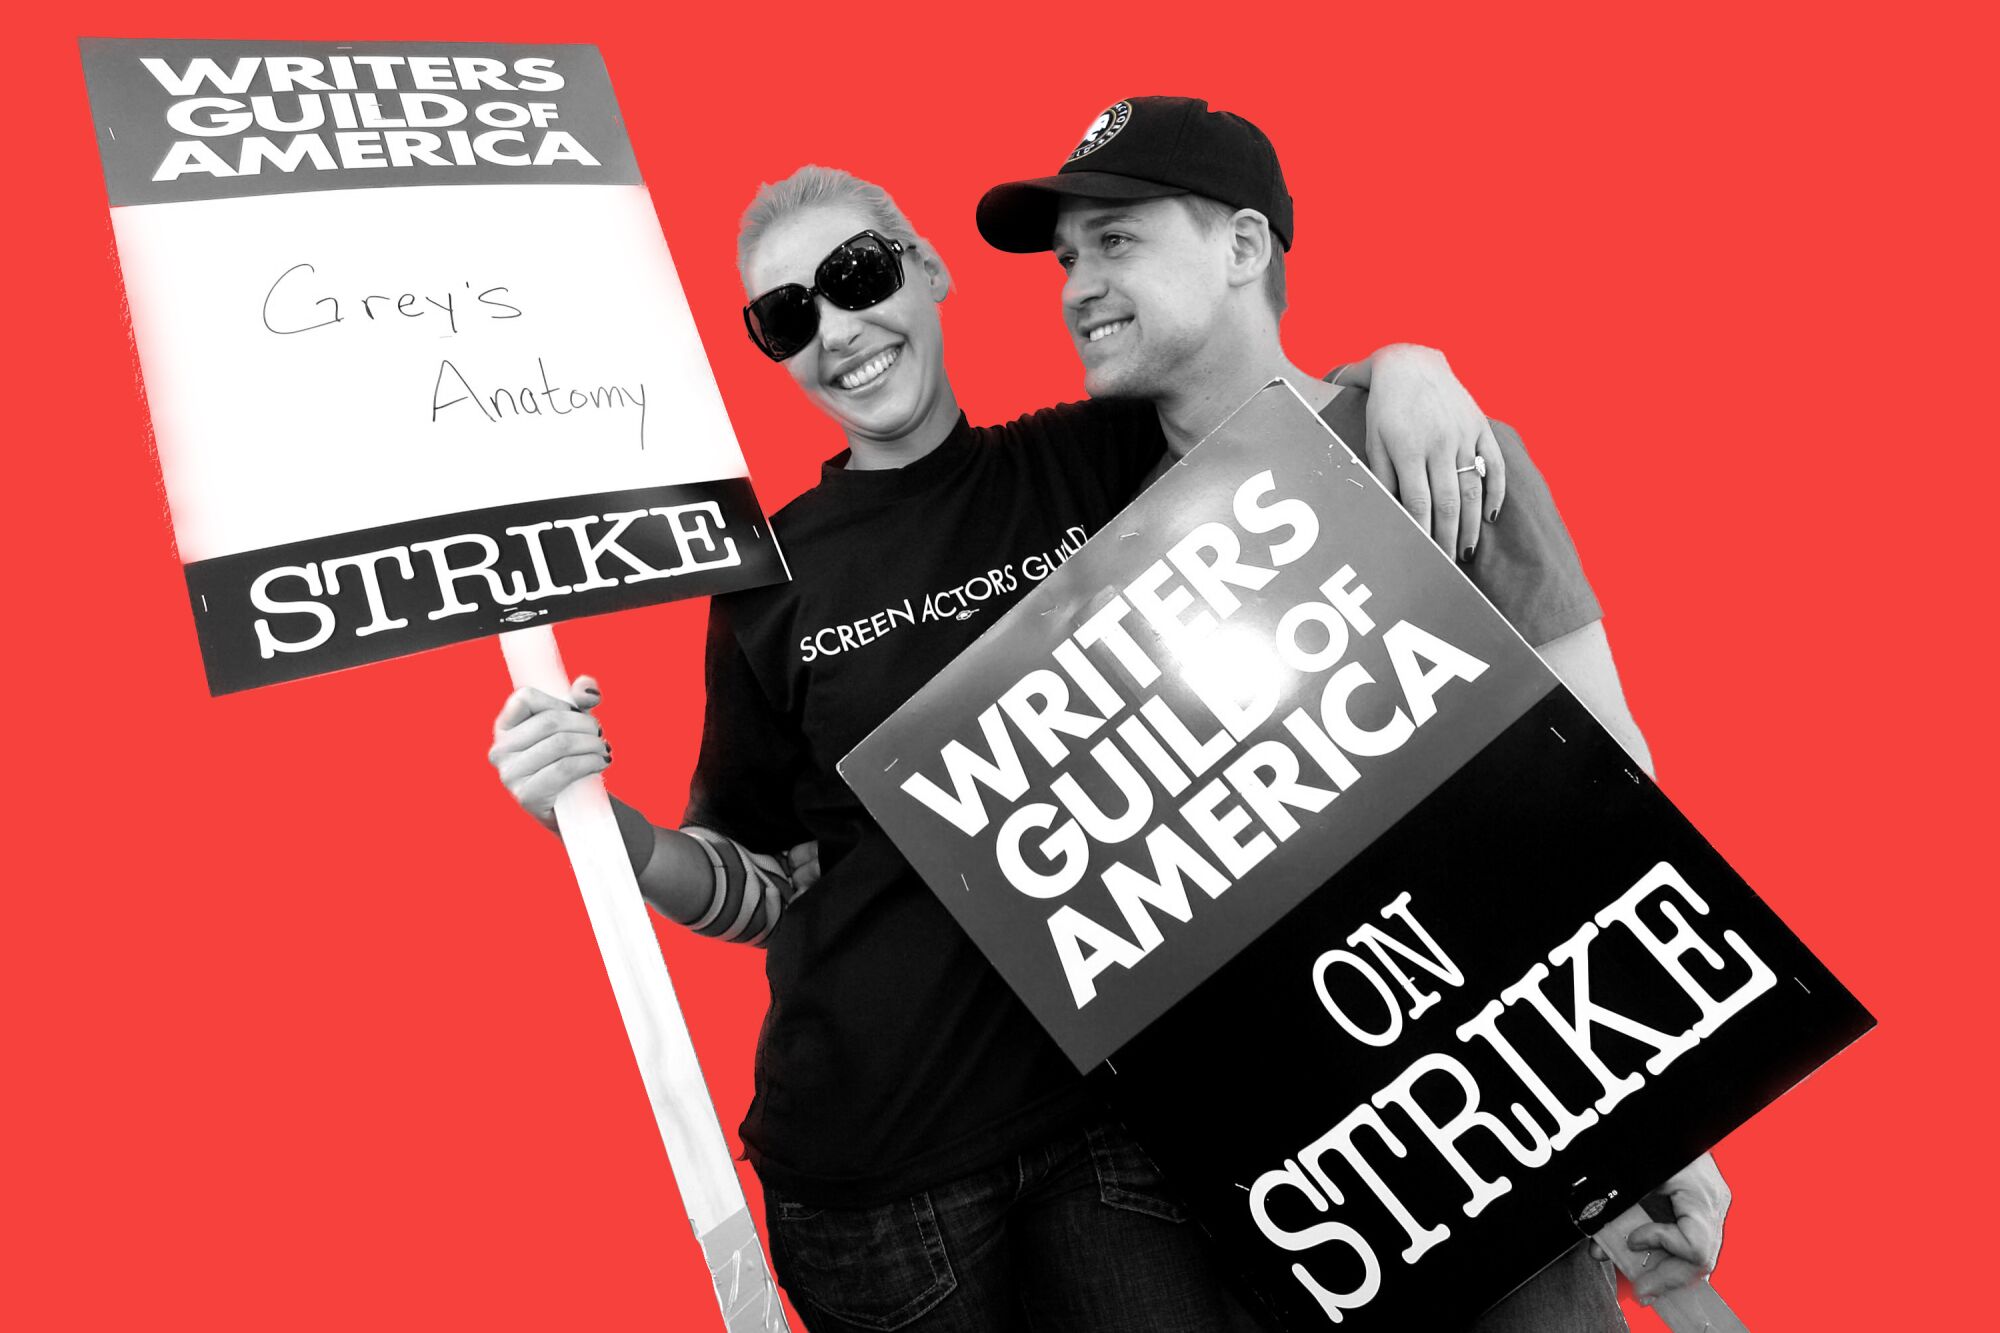 Actors Katherine Heigl and T.R. Knight march in support of striking members of the Writers Guild of America.